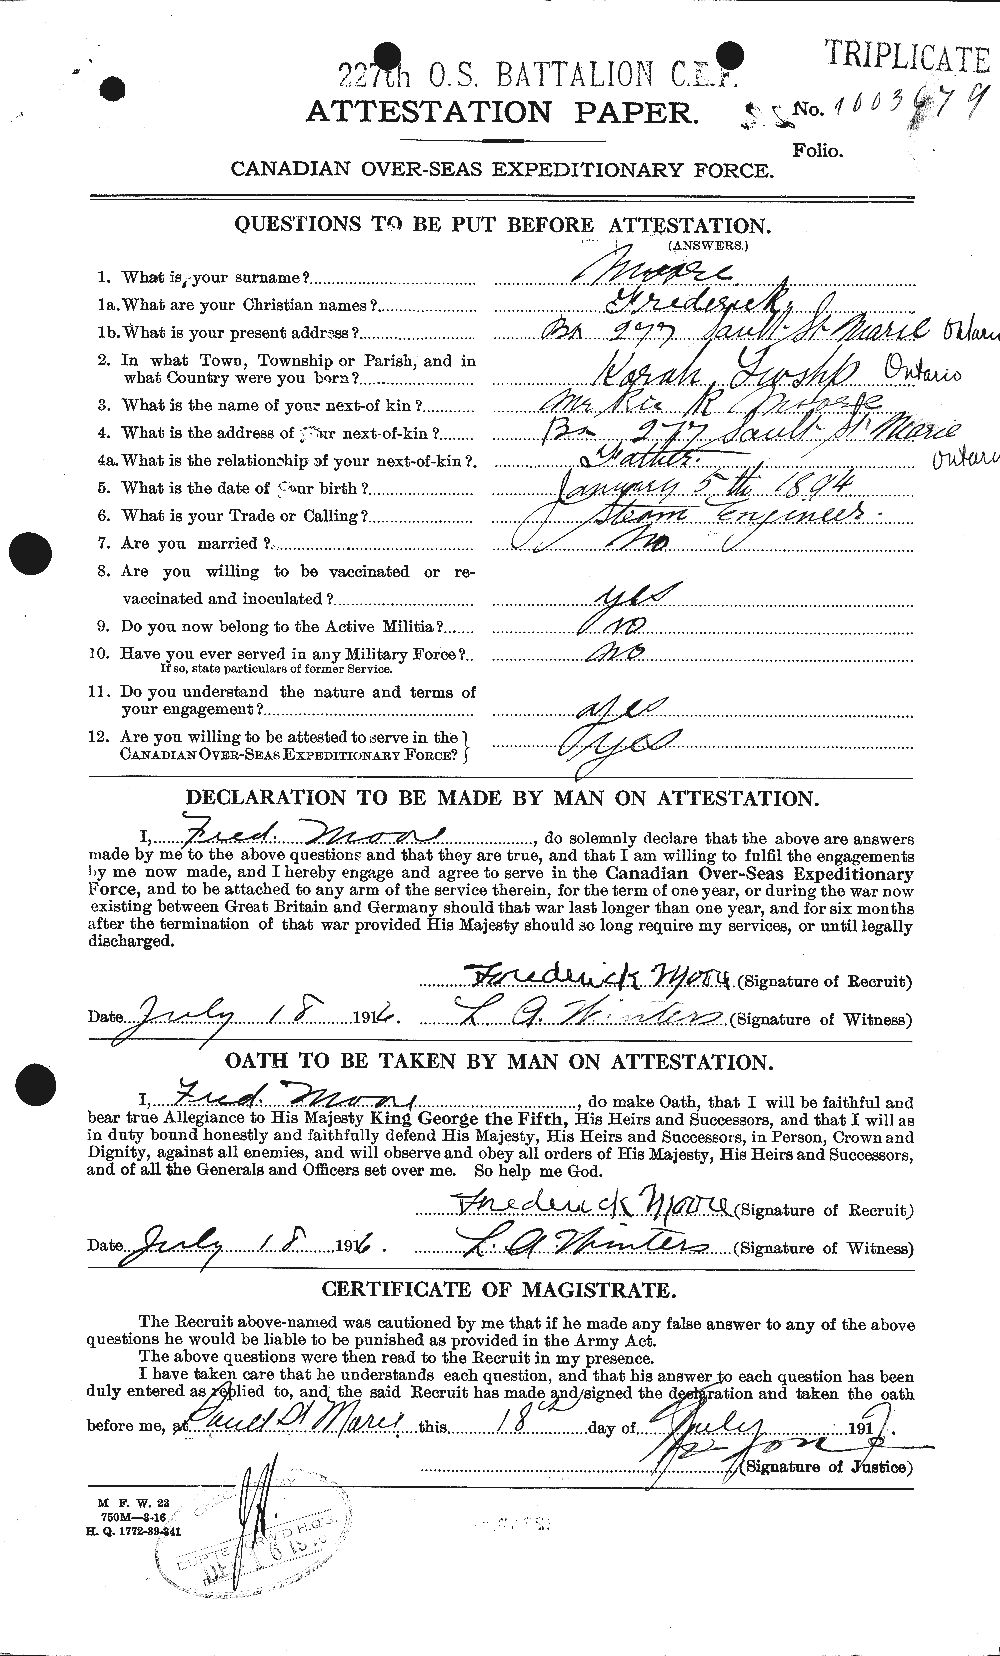 Personnel Records of the First World War - CEF 506729a